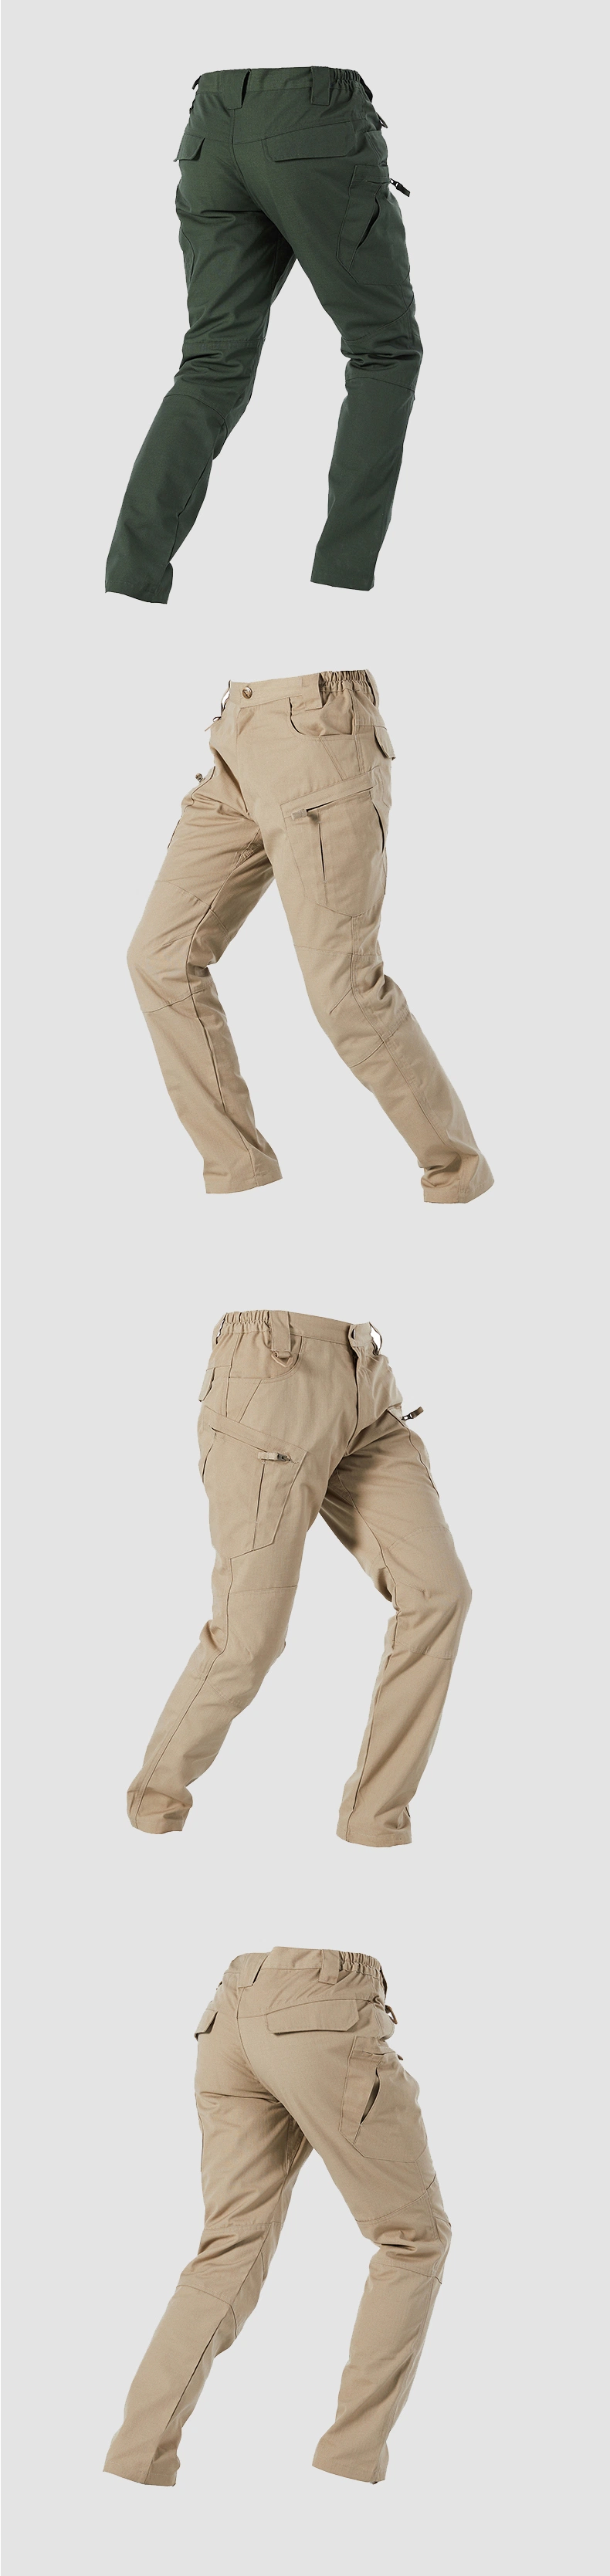 X8 Men&prime;s Tear Resistant and Waterproof Outdoor Hiking Pants Polyester Cotton Pants